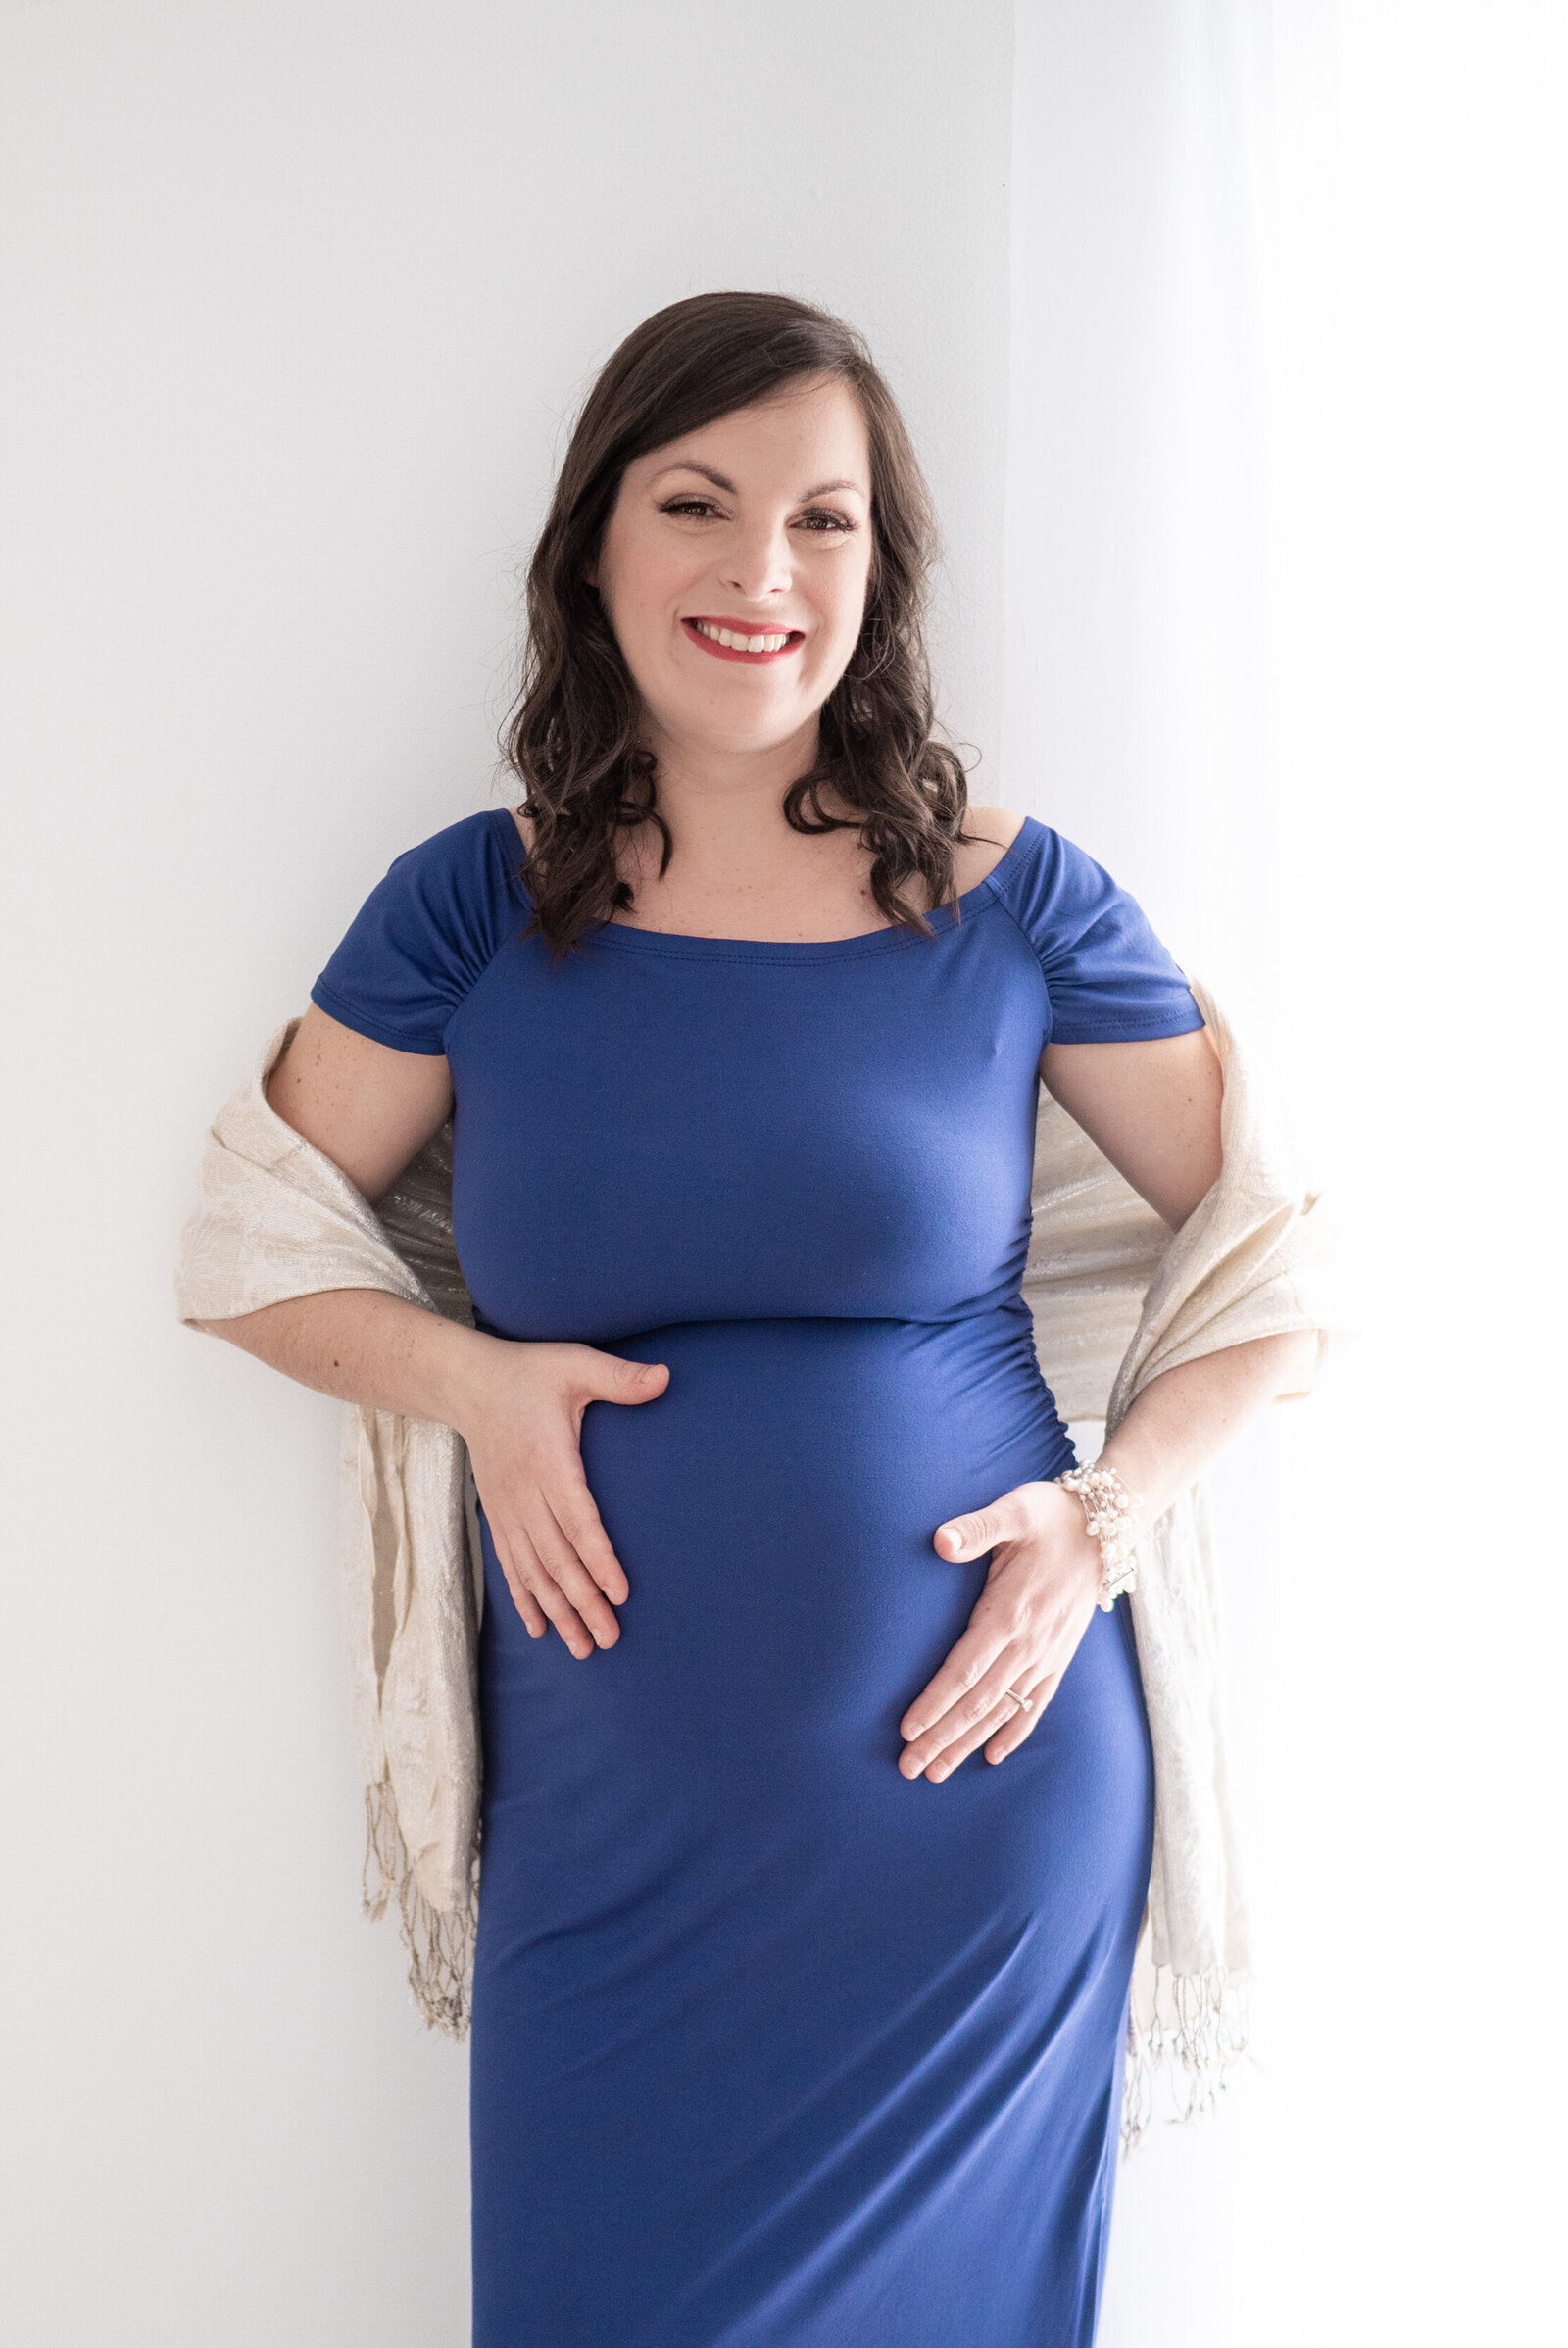 A pregnant woman leaning on  a wall  with her hands on either side of her stomach as she poses for her maternity photos